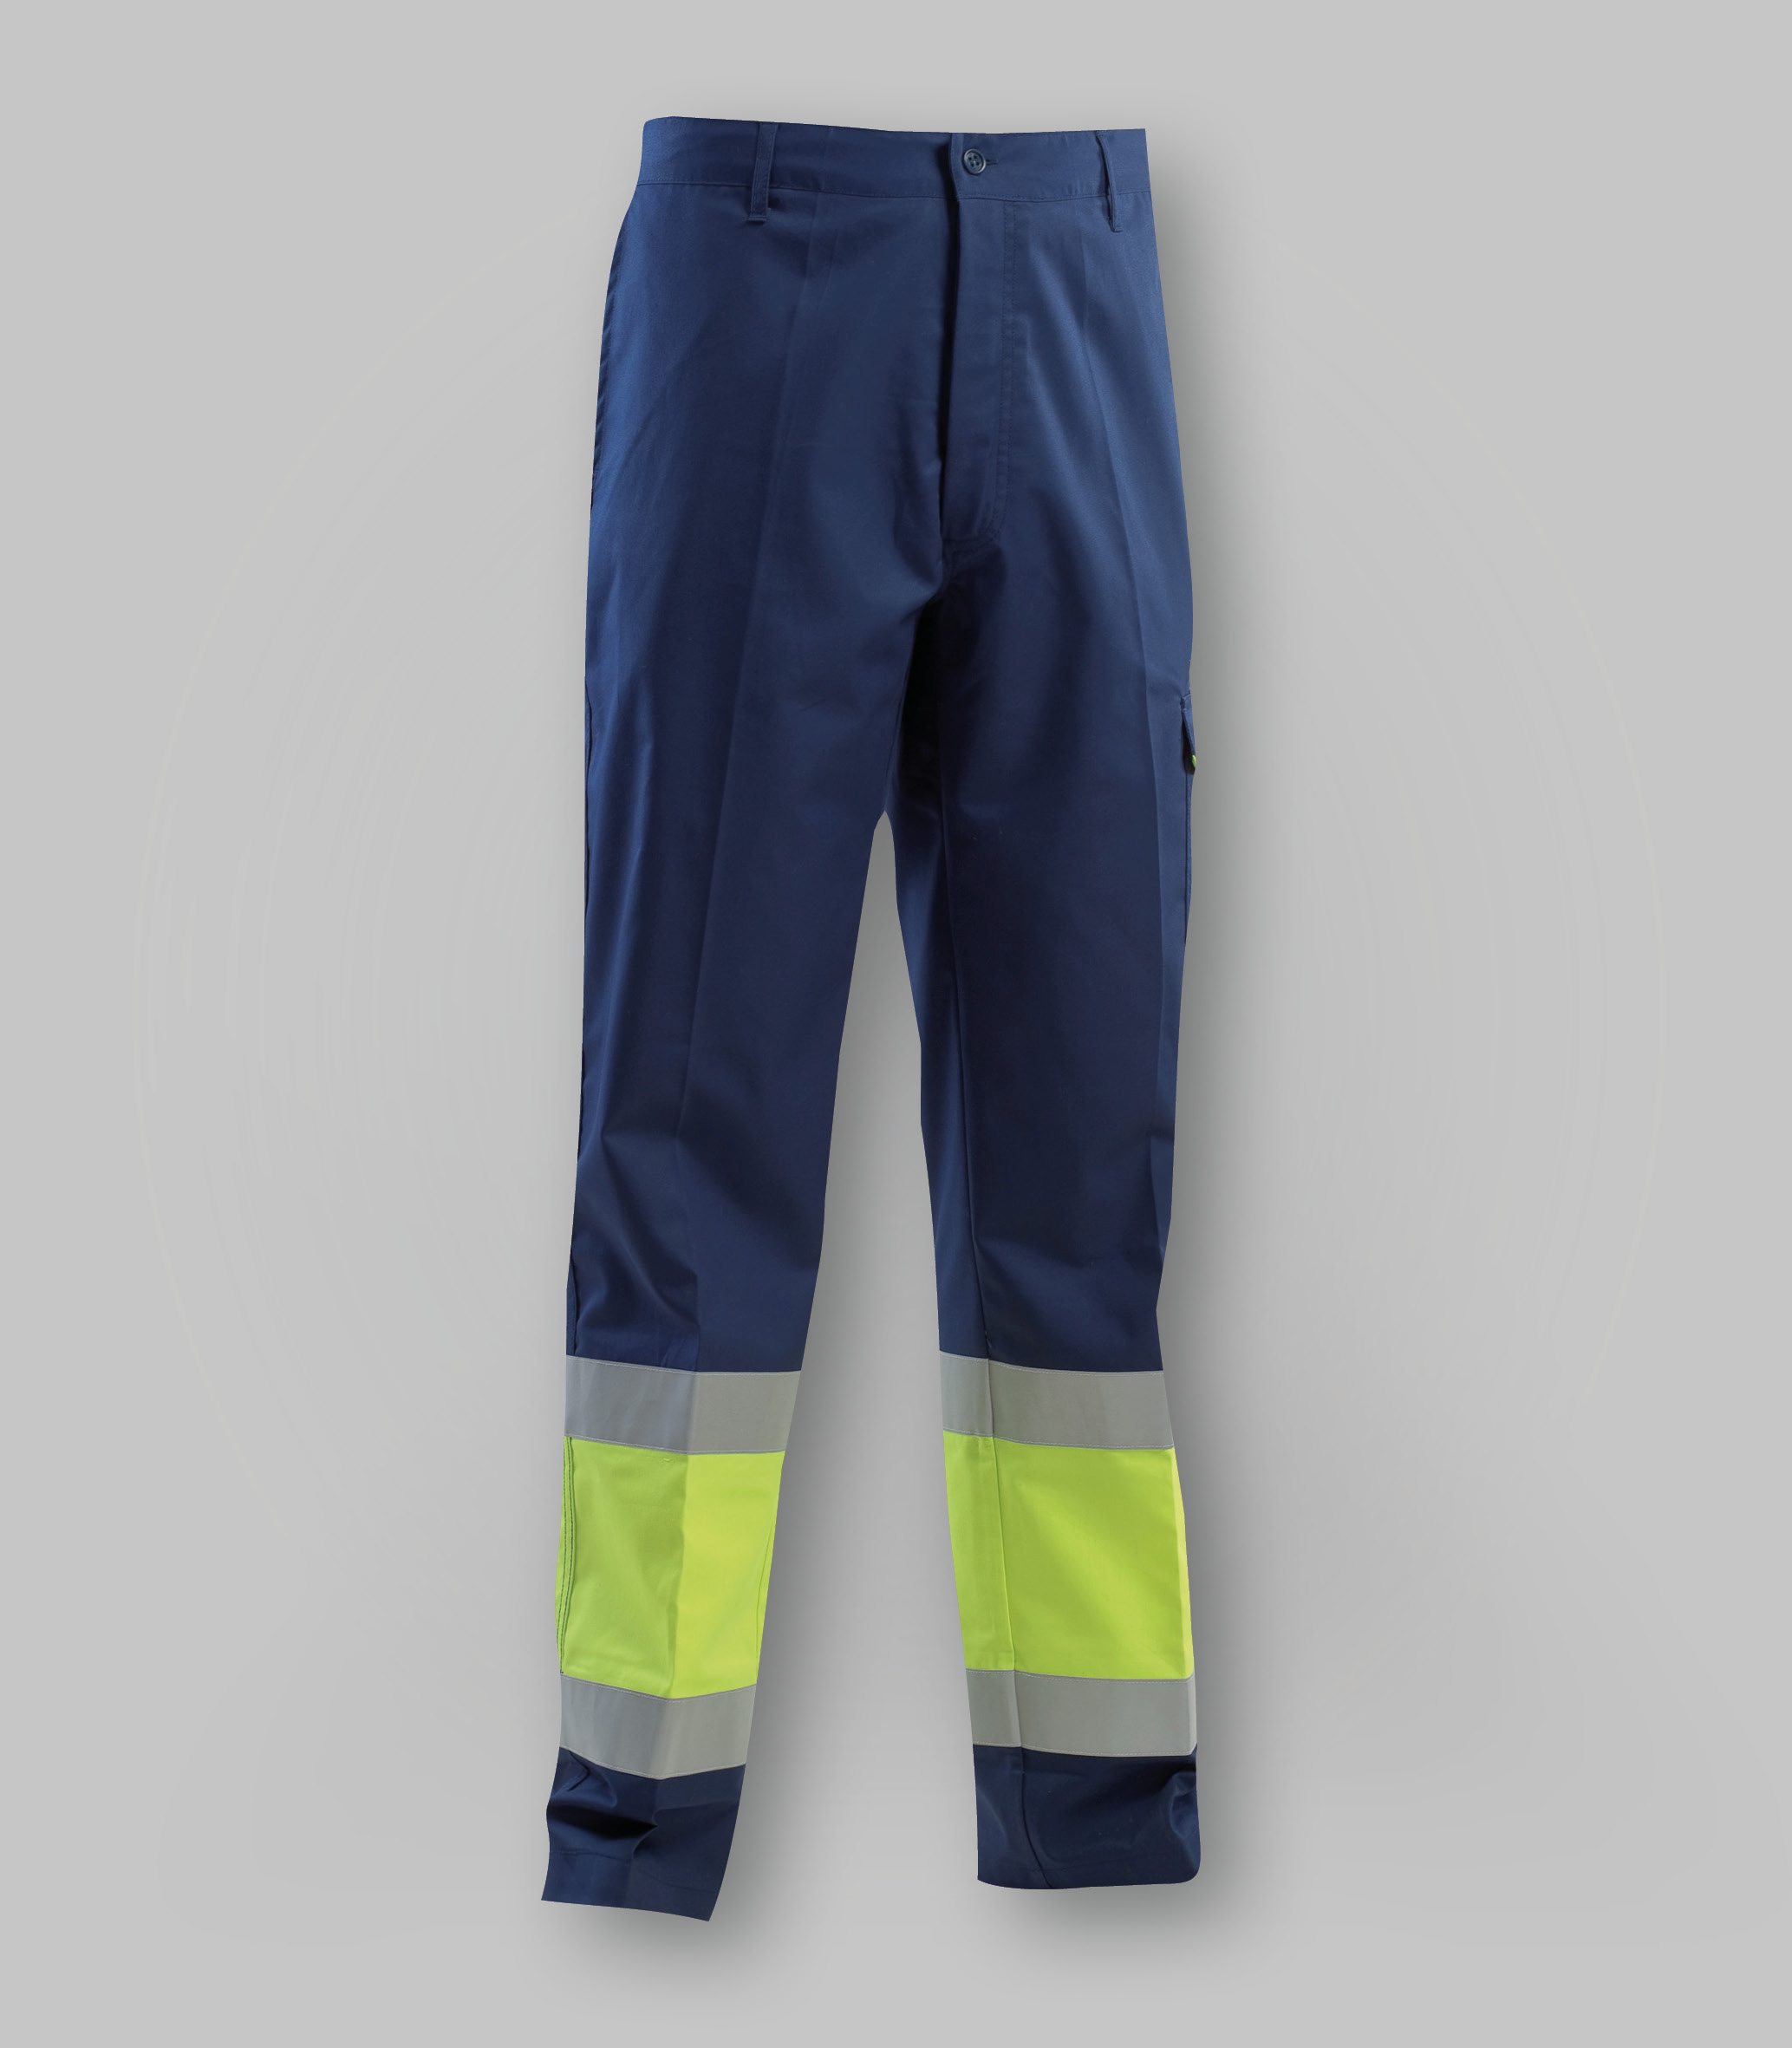 High-visibility multi-protection trousers